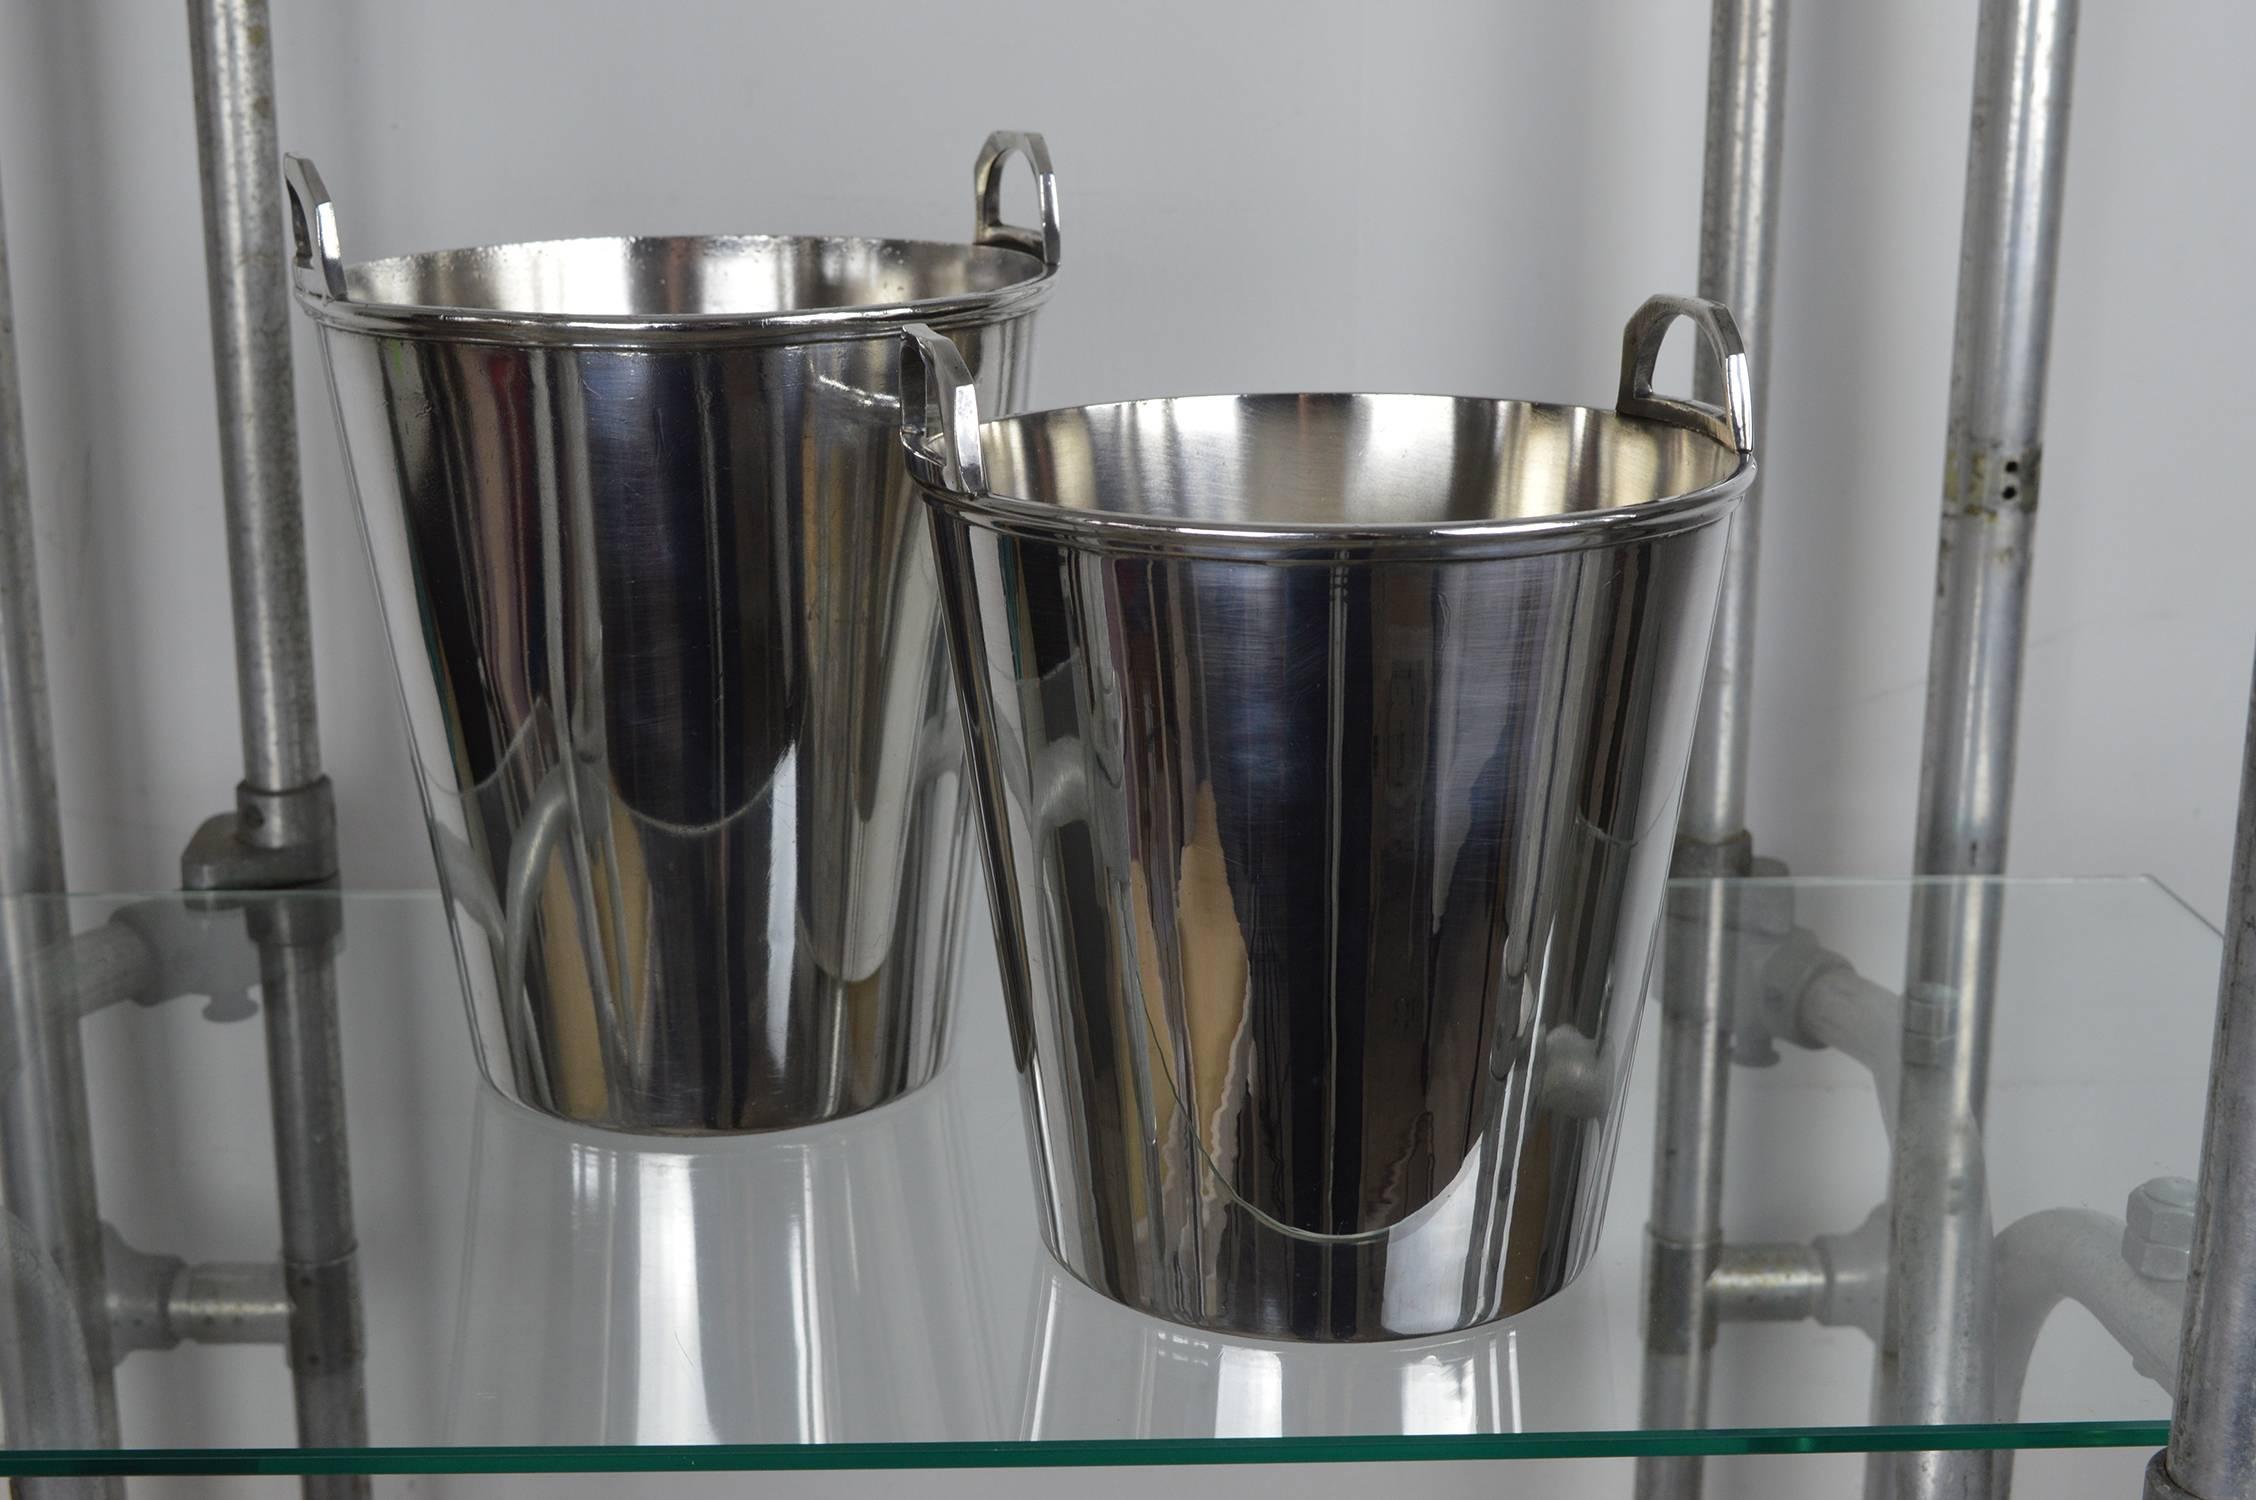 Two very smart silver plated ice or champagne buckets.

Understated elegance.

Super quality.

Both a small inscription on the side-Doyle Hotels.

One is Irish, the other English.

The measurements given below are for the slightly larger